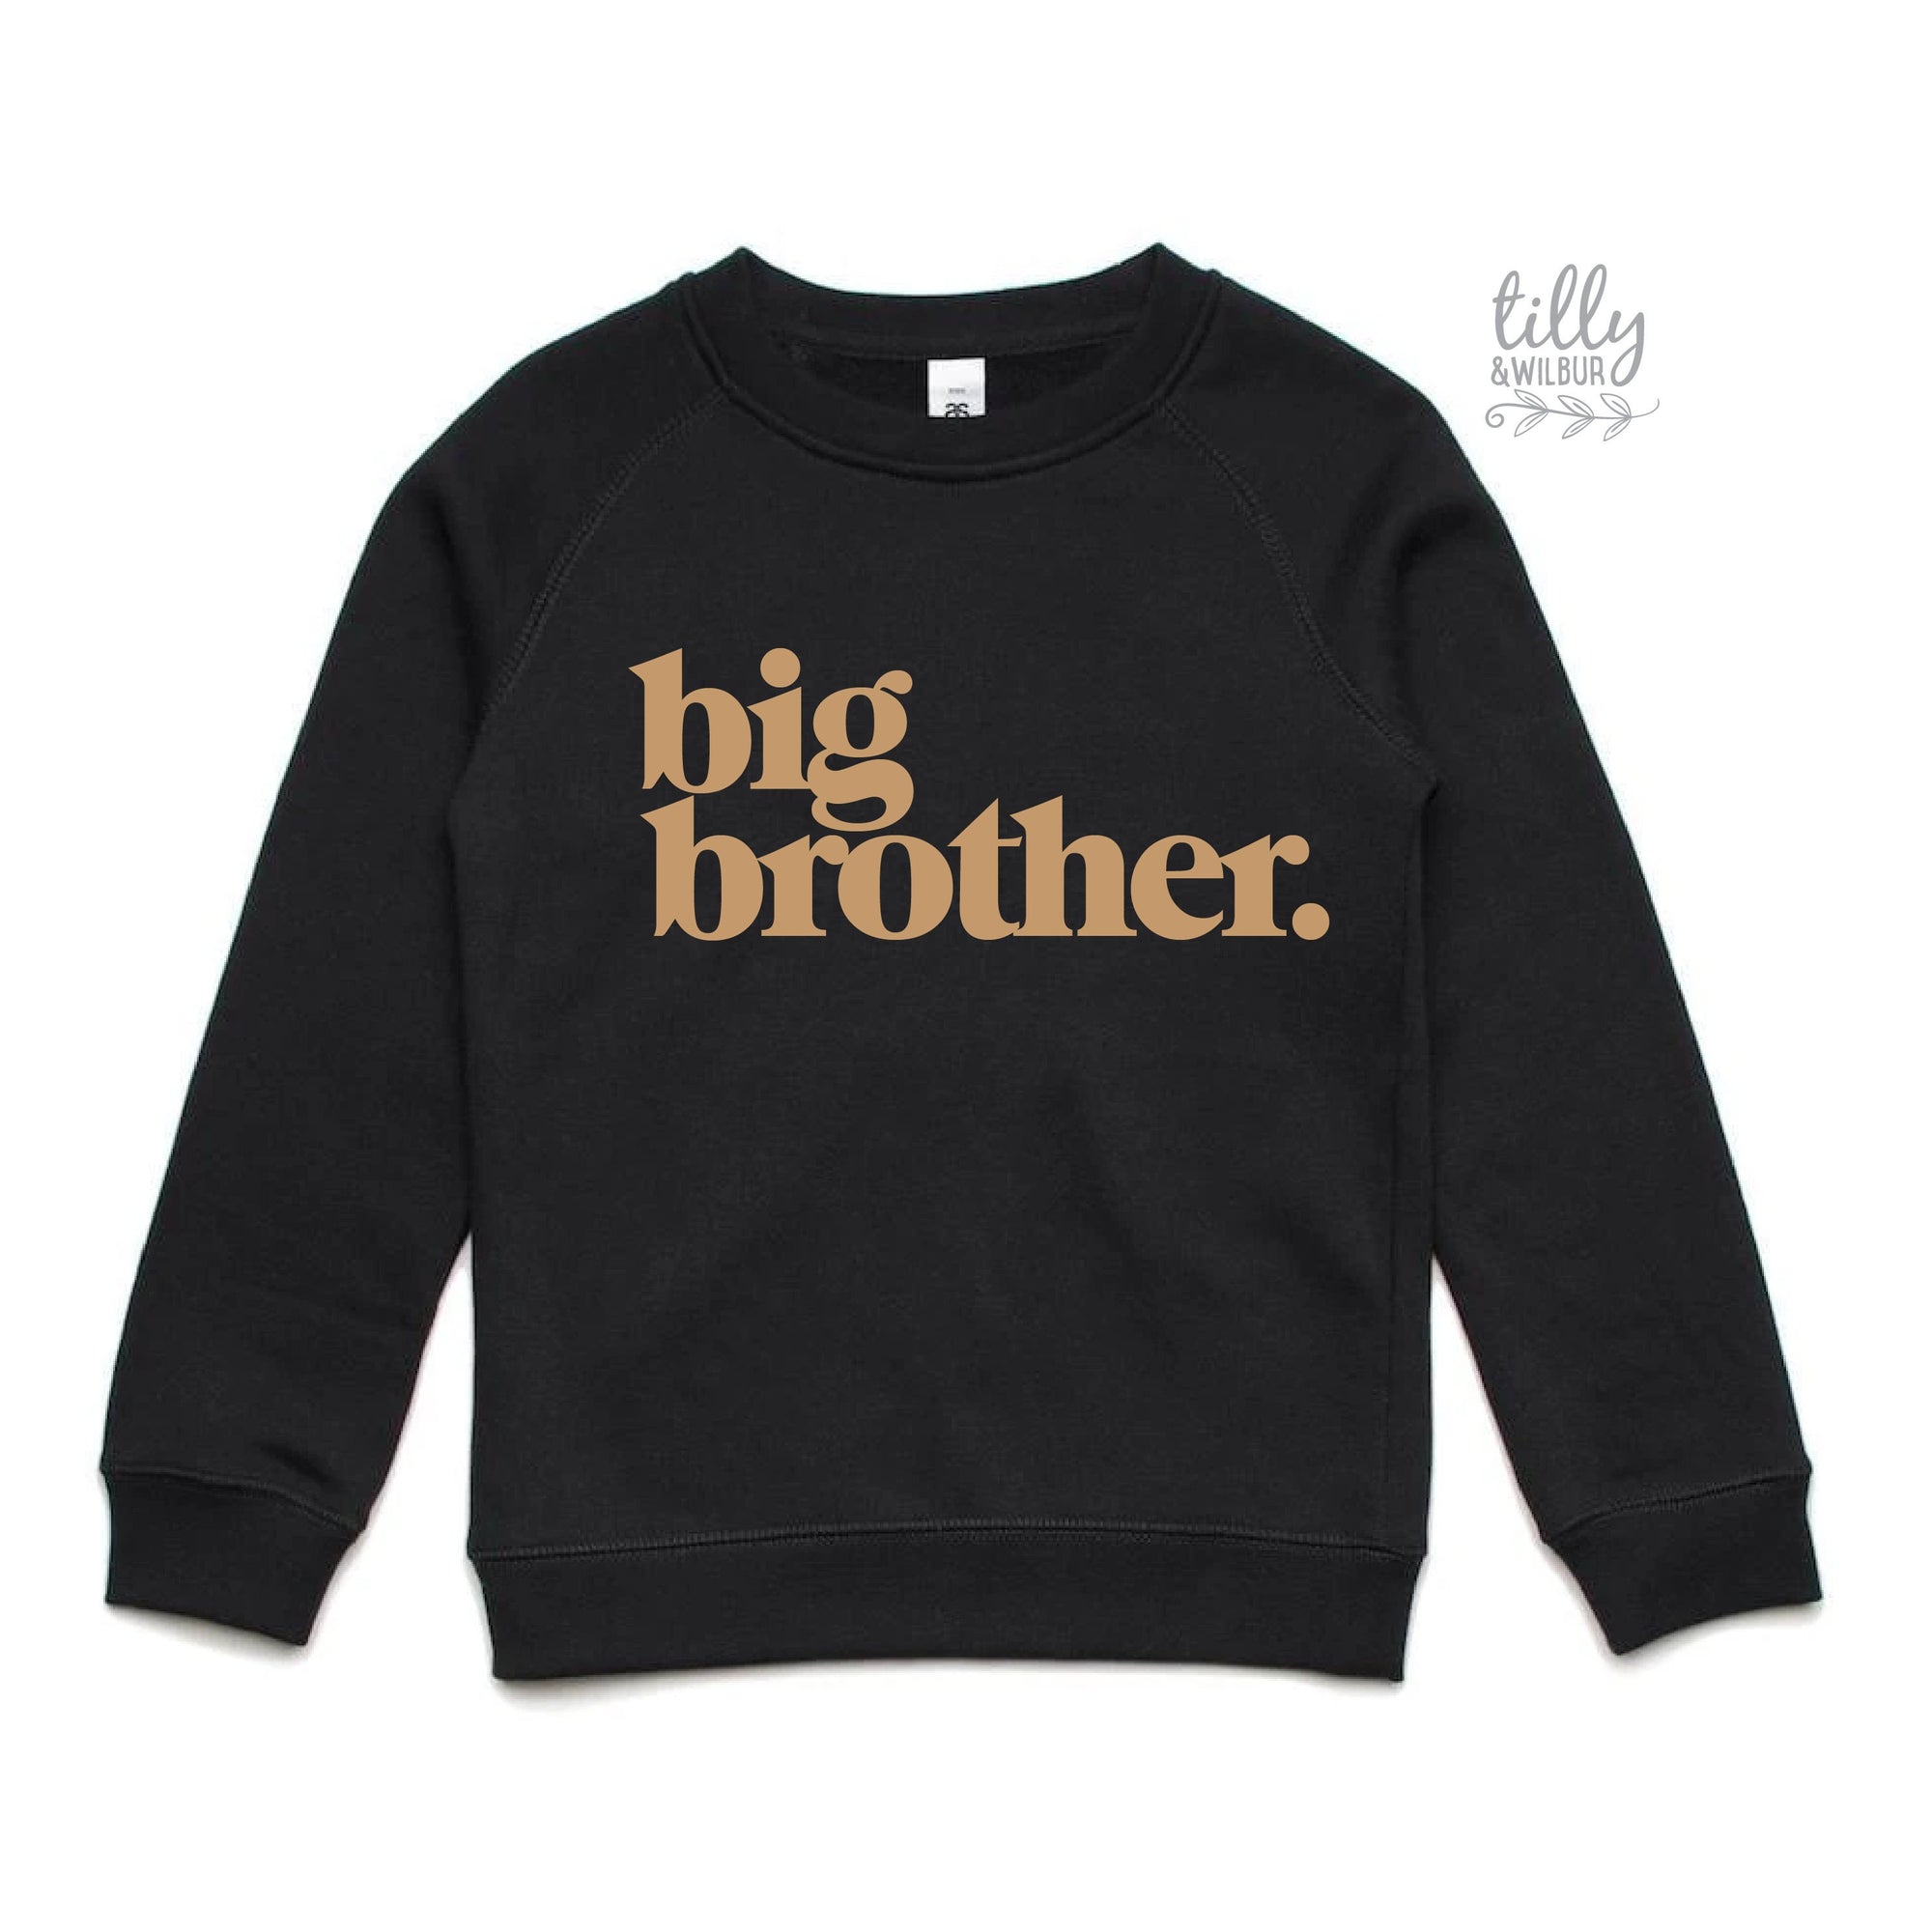 Big Brother Jumper, Big Brother Sweatshirt, Promoted To Big Brother Hoodie, Big Brother T-Shirt, I'm Going To Be A Big Brother, Brother Gift